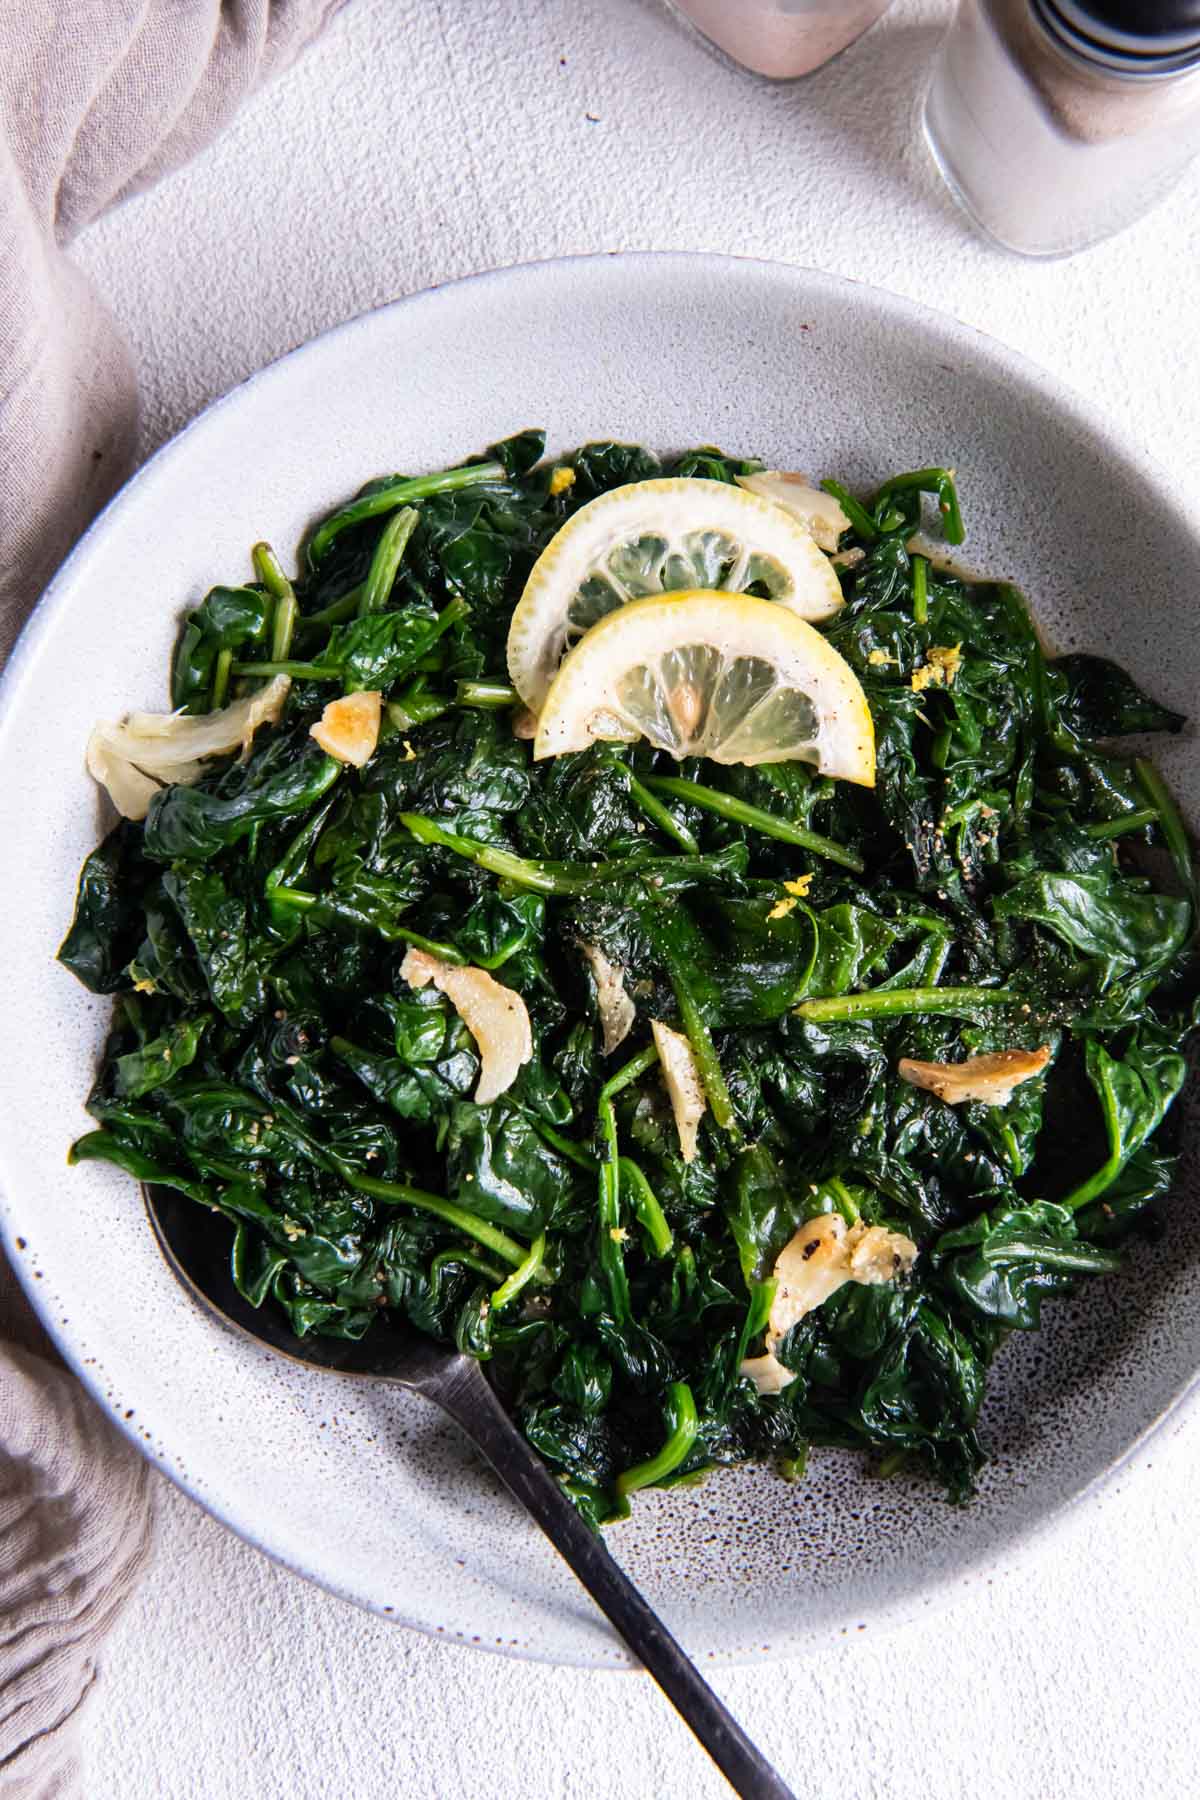 Sautéed spinach with garlic and lemon wedges in a serving bowl with a spoon.